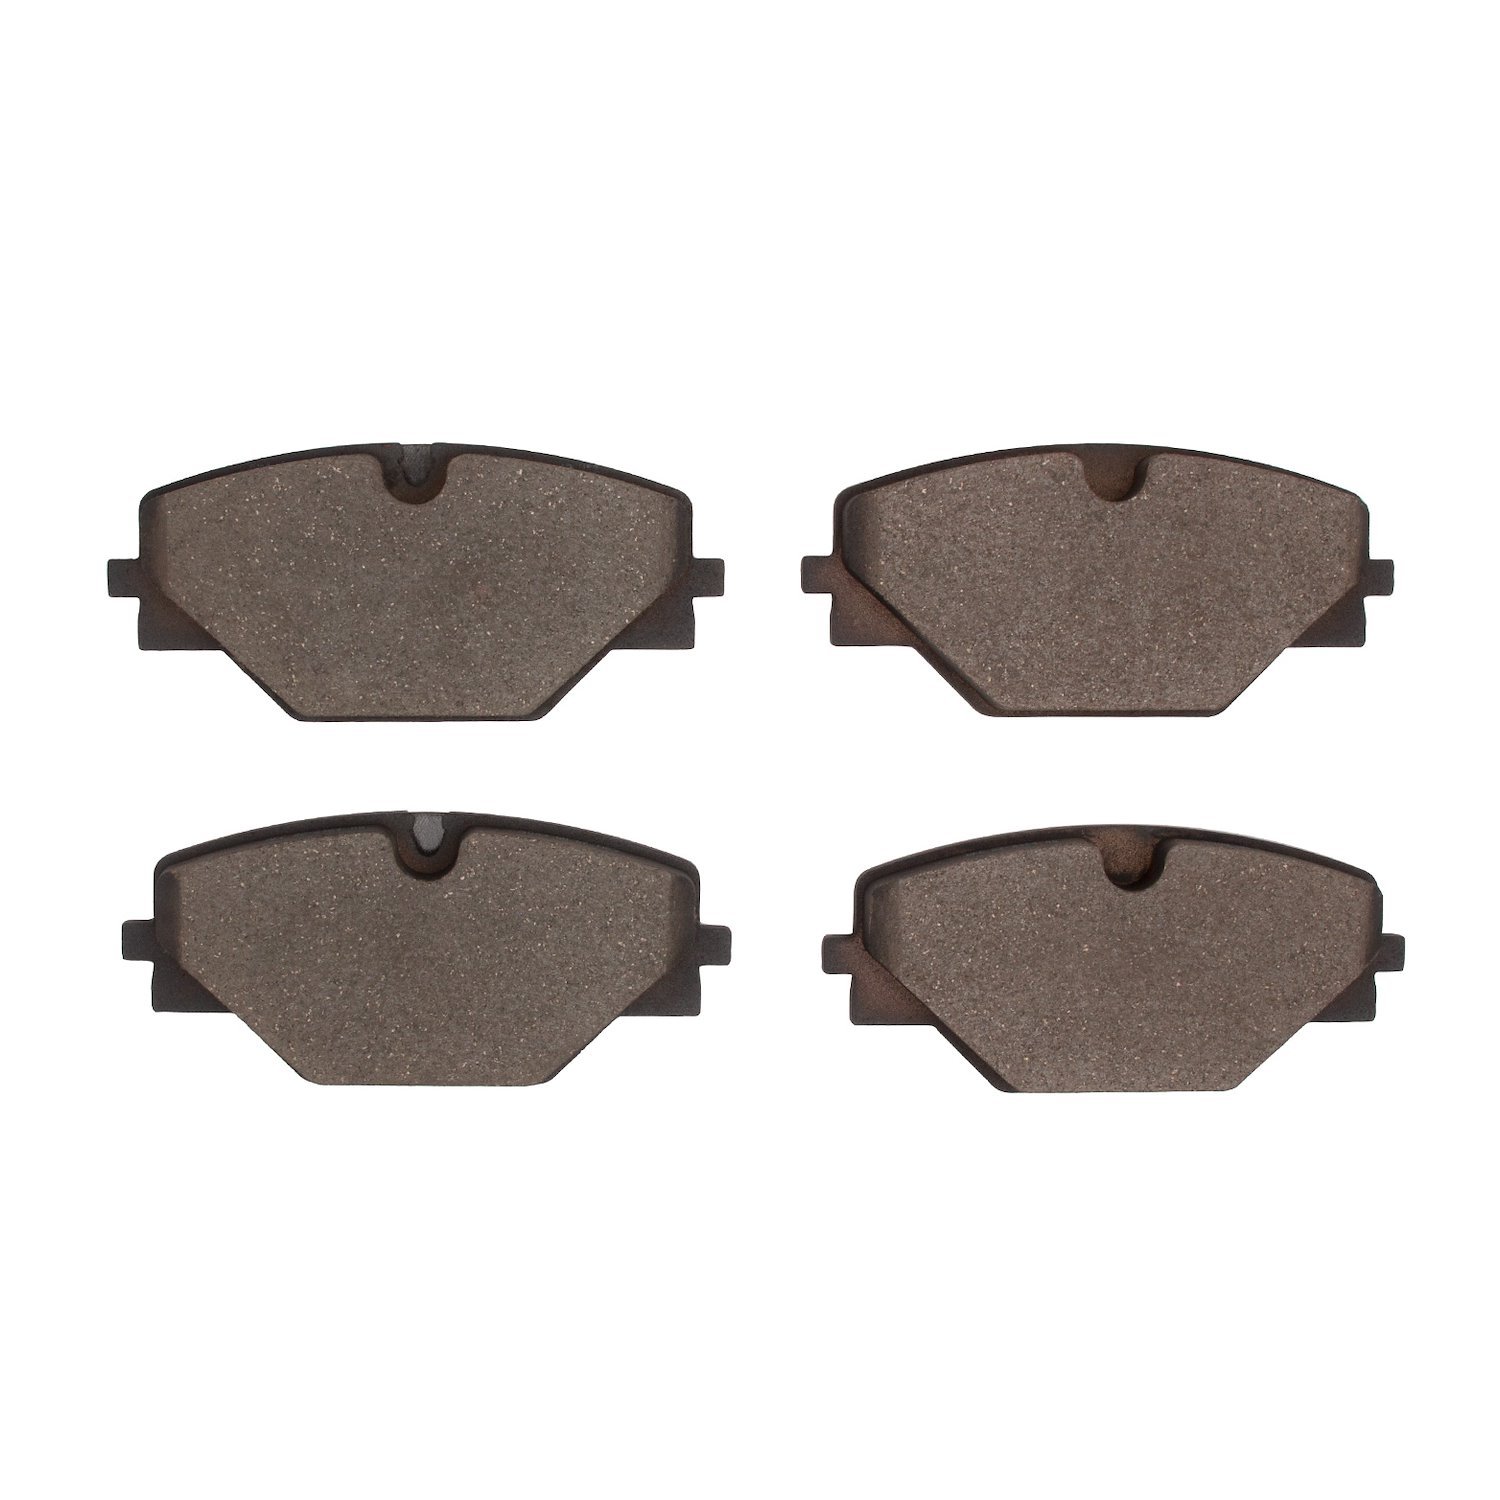 1552-2464-00 5000 Advanced Low-Metallic Brake Pads, Fits Select Land Rover, Position: Rear